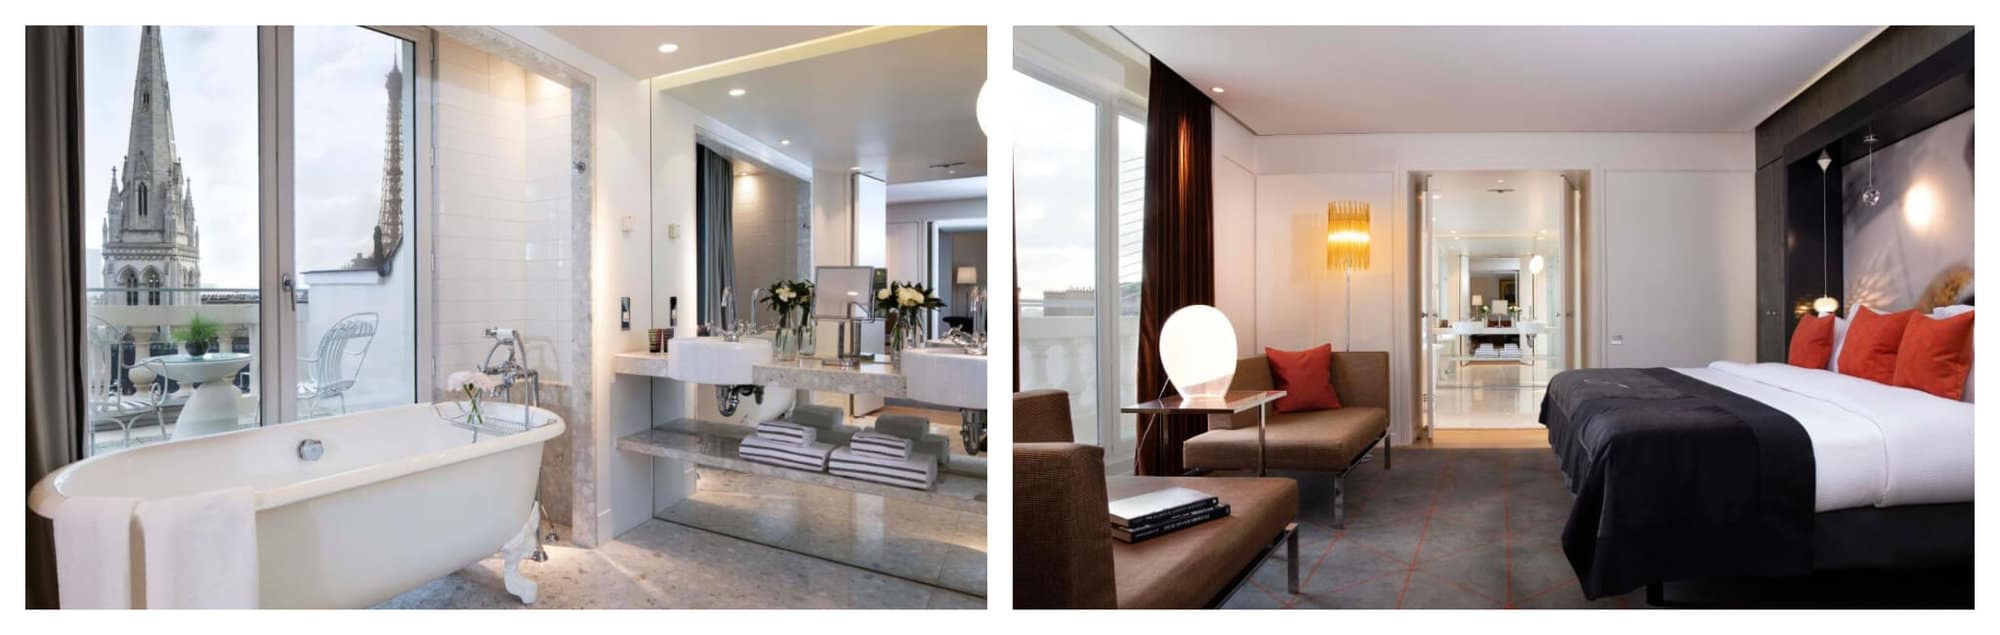 Left: a hotel bathroom with marbled floors, a huge white bathtub, and windows with views of the Eiffel Tower and a church tower in Paris; Right: a hotel bedroom with a king sized bed that has white and black linens, and two tables and a circular chair in front of the bed.